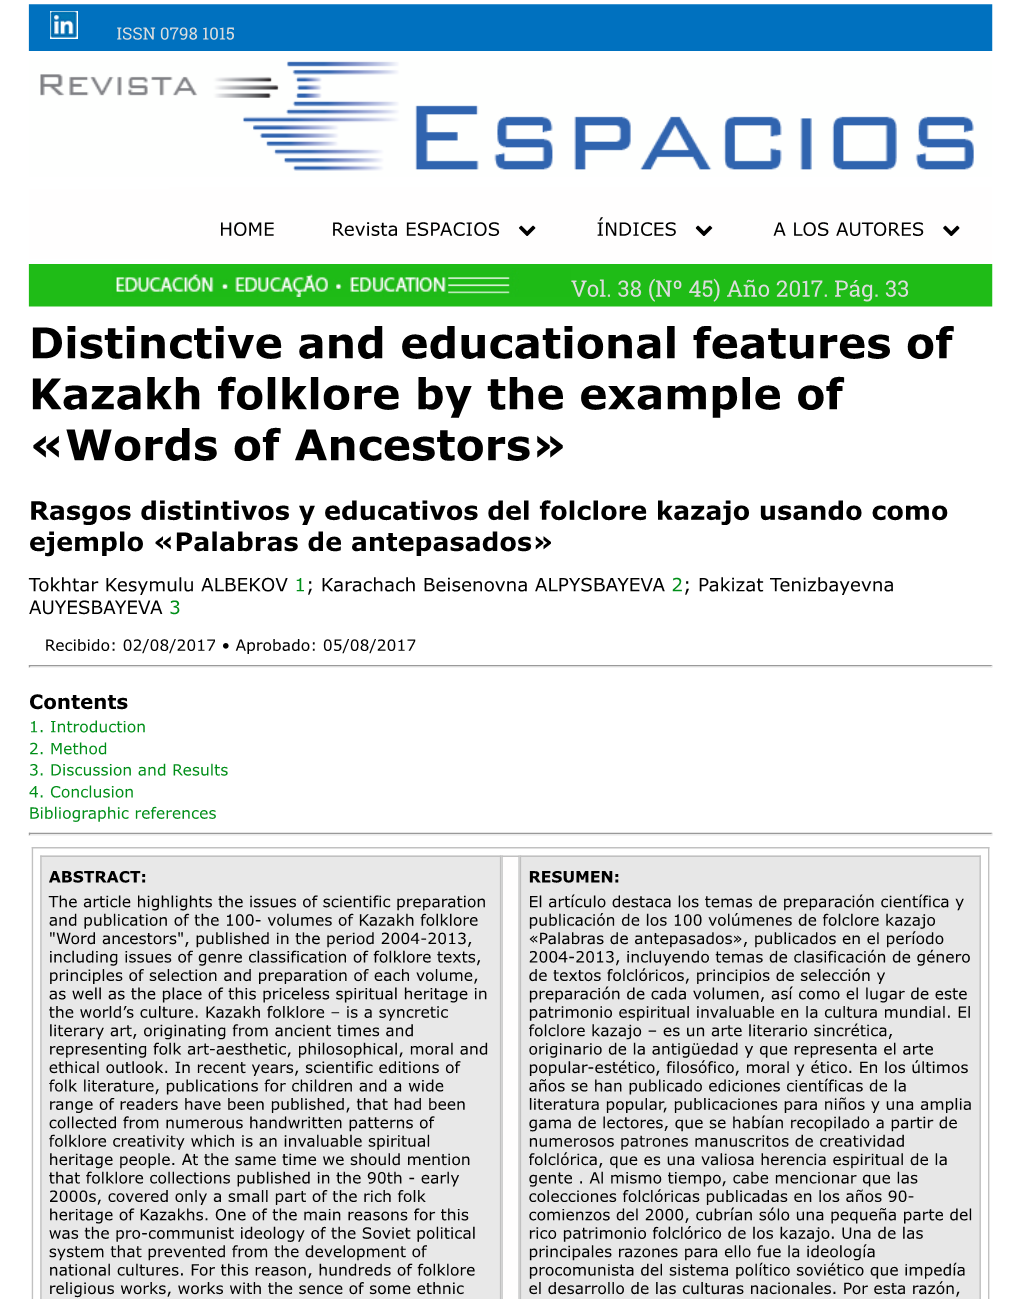 Distinctive and Educational Features of Kazakh Folklore by the Example of «Words of Ancestors»